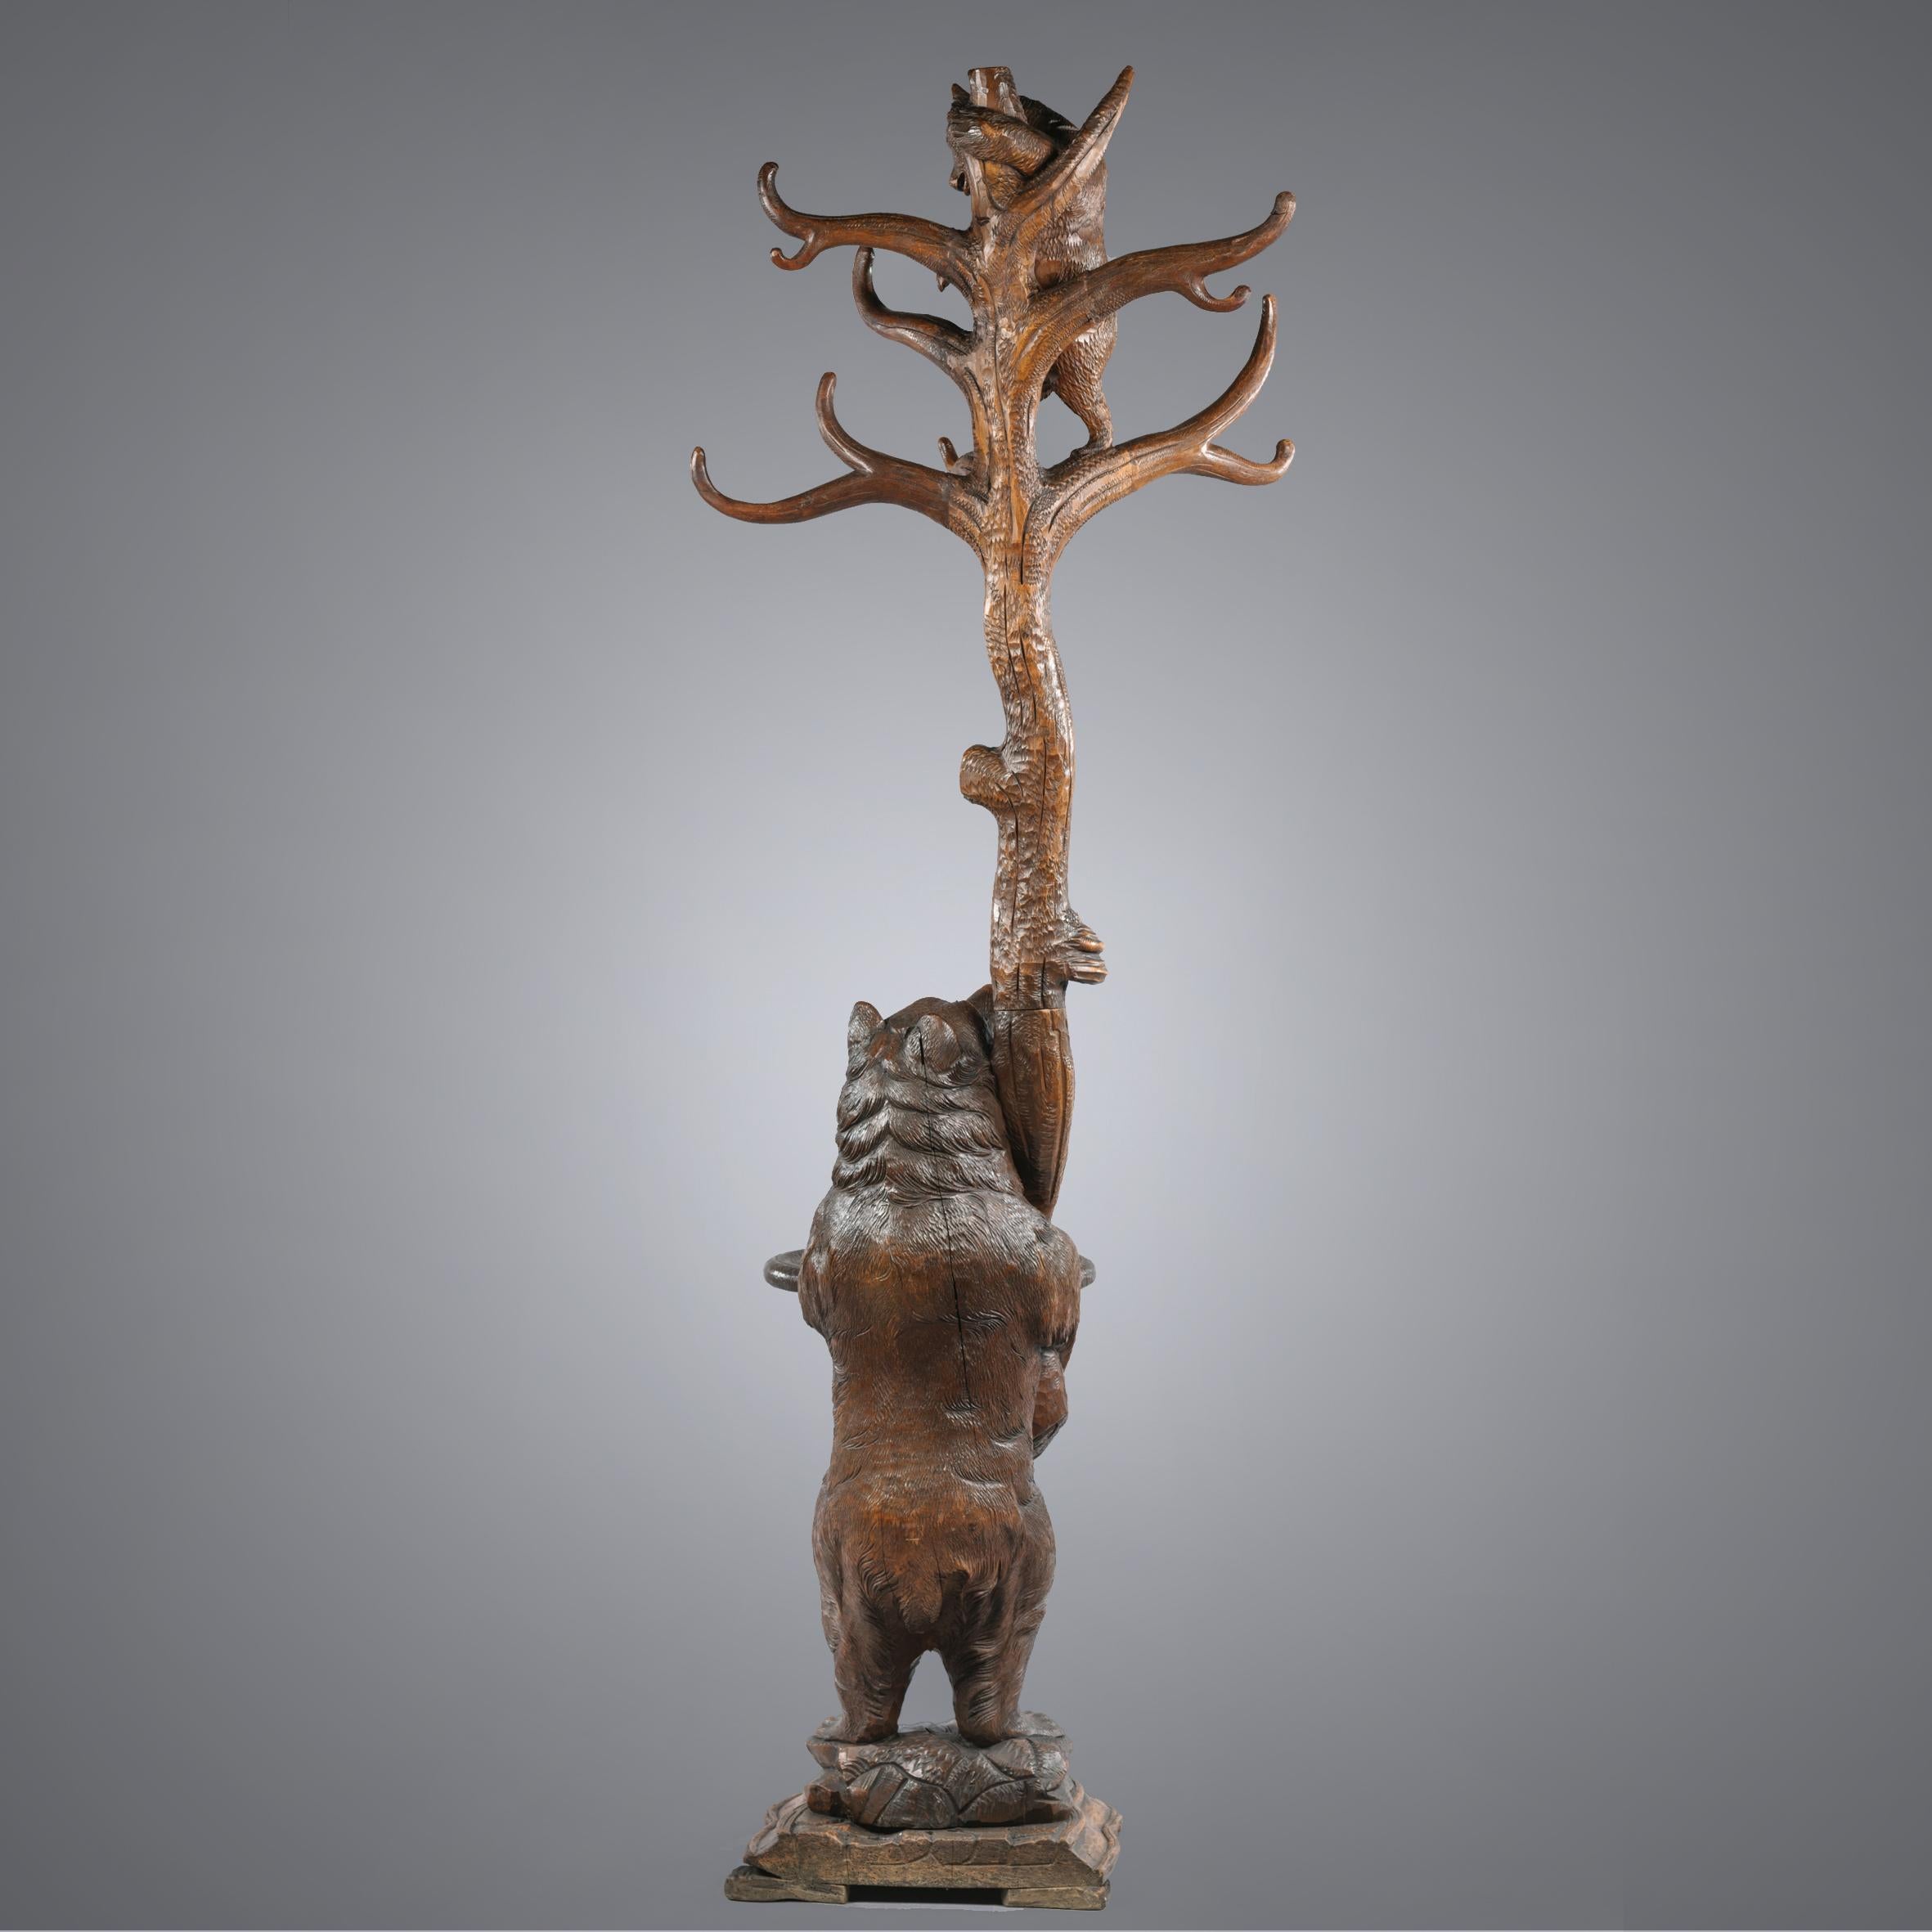 A fine 19th Century Brienz Black Forest hand-carved bear hall stand.

This charming hall stand is naturalistically carved in Linden wood and depicts a standing Black Forest bear next to a tree, with open mouth and eyes watching its young cub in